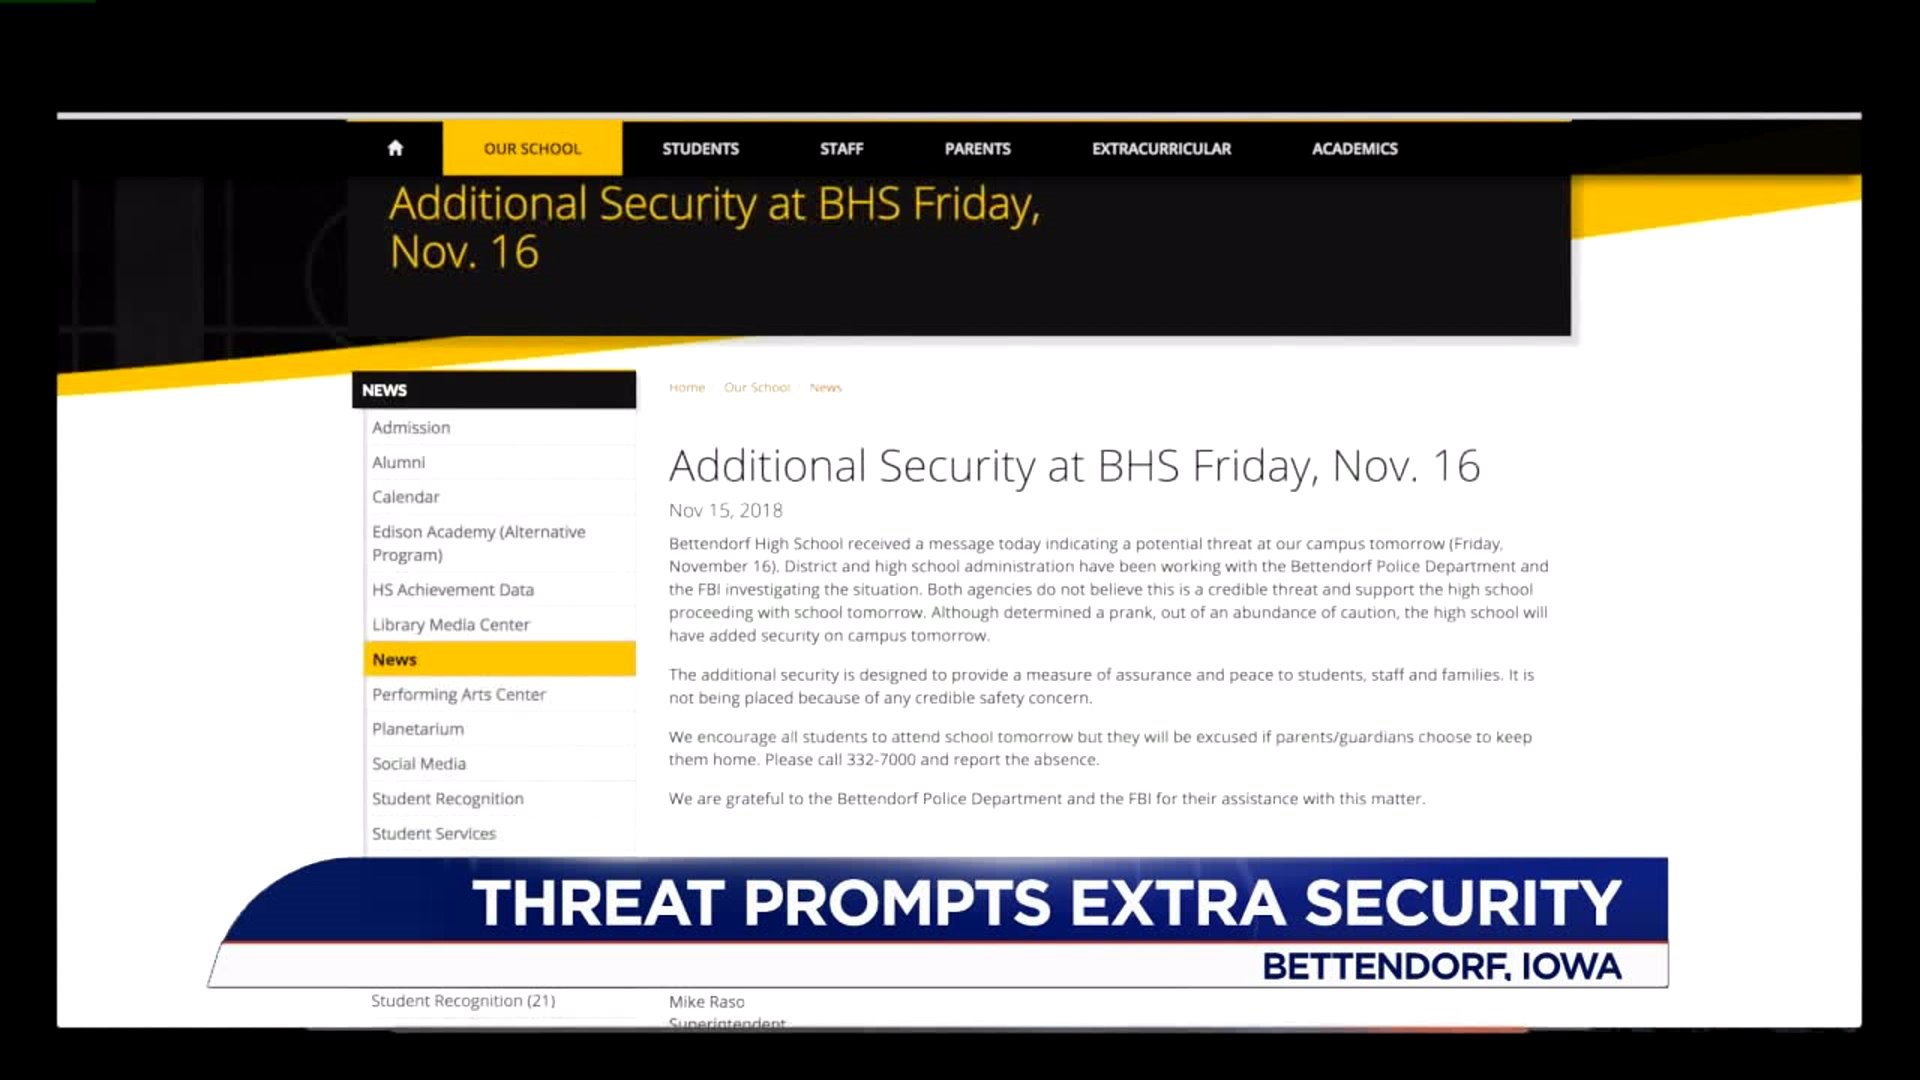 Threat prompts extra security at BHS